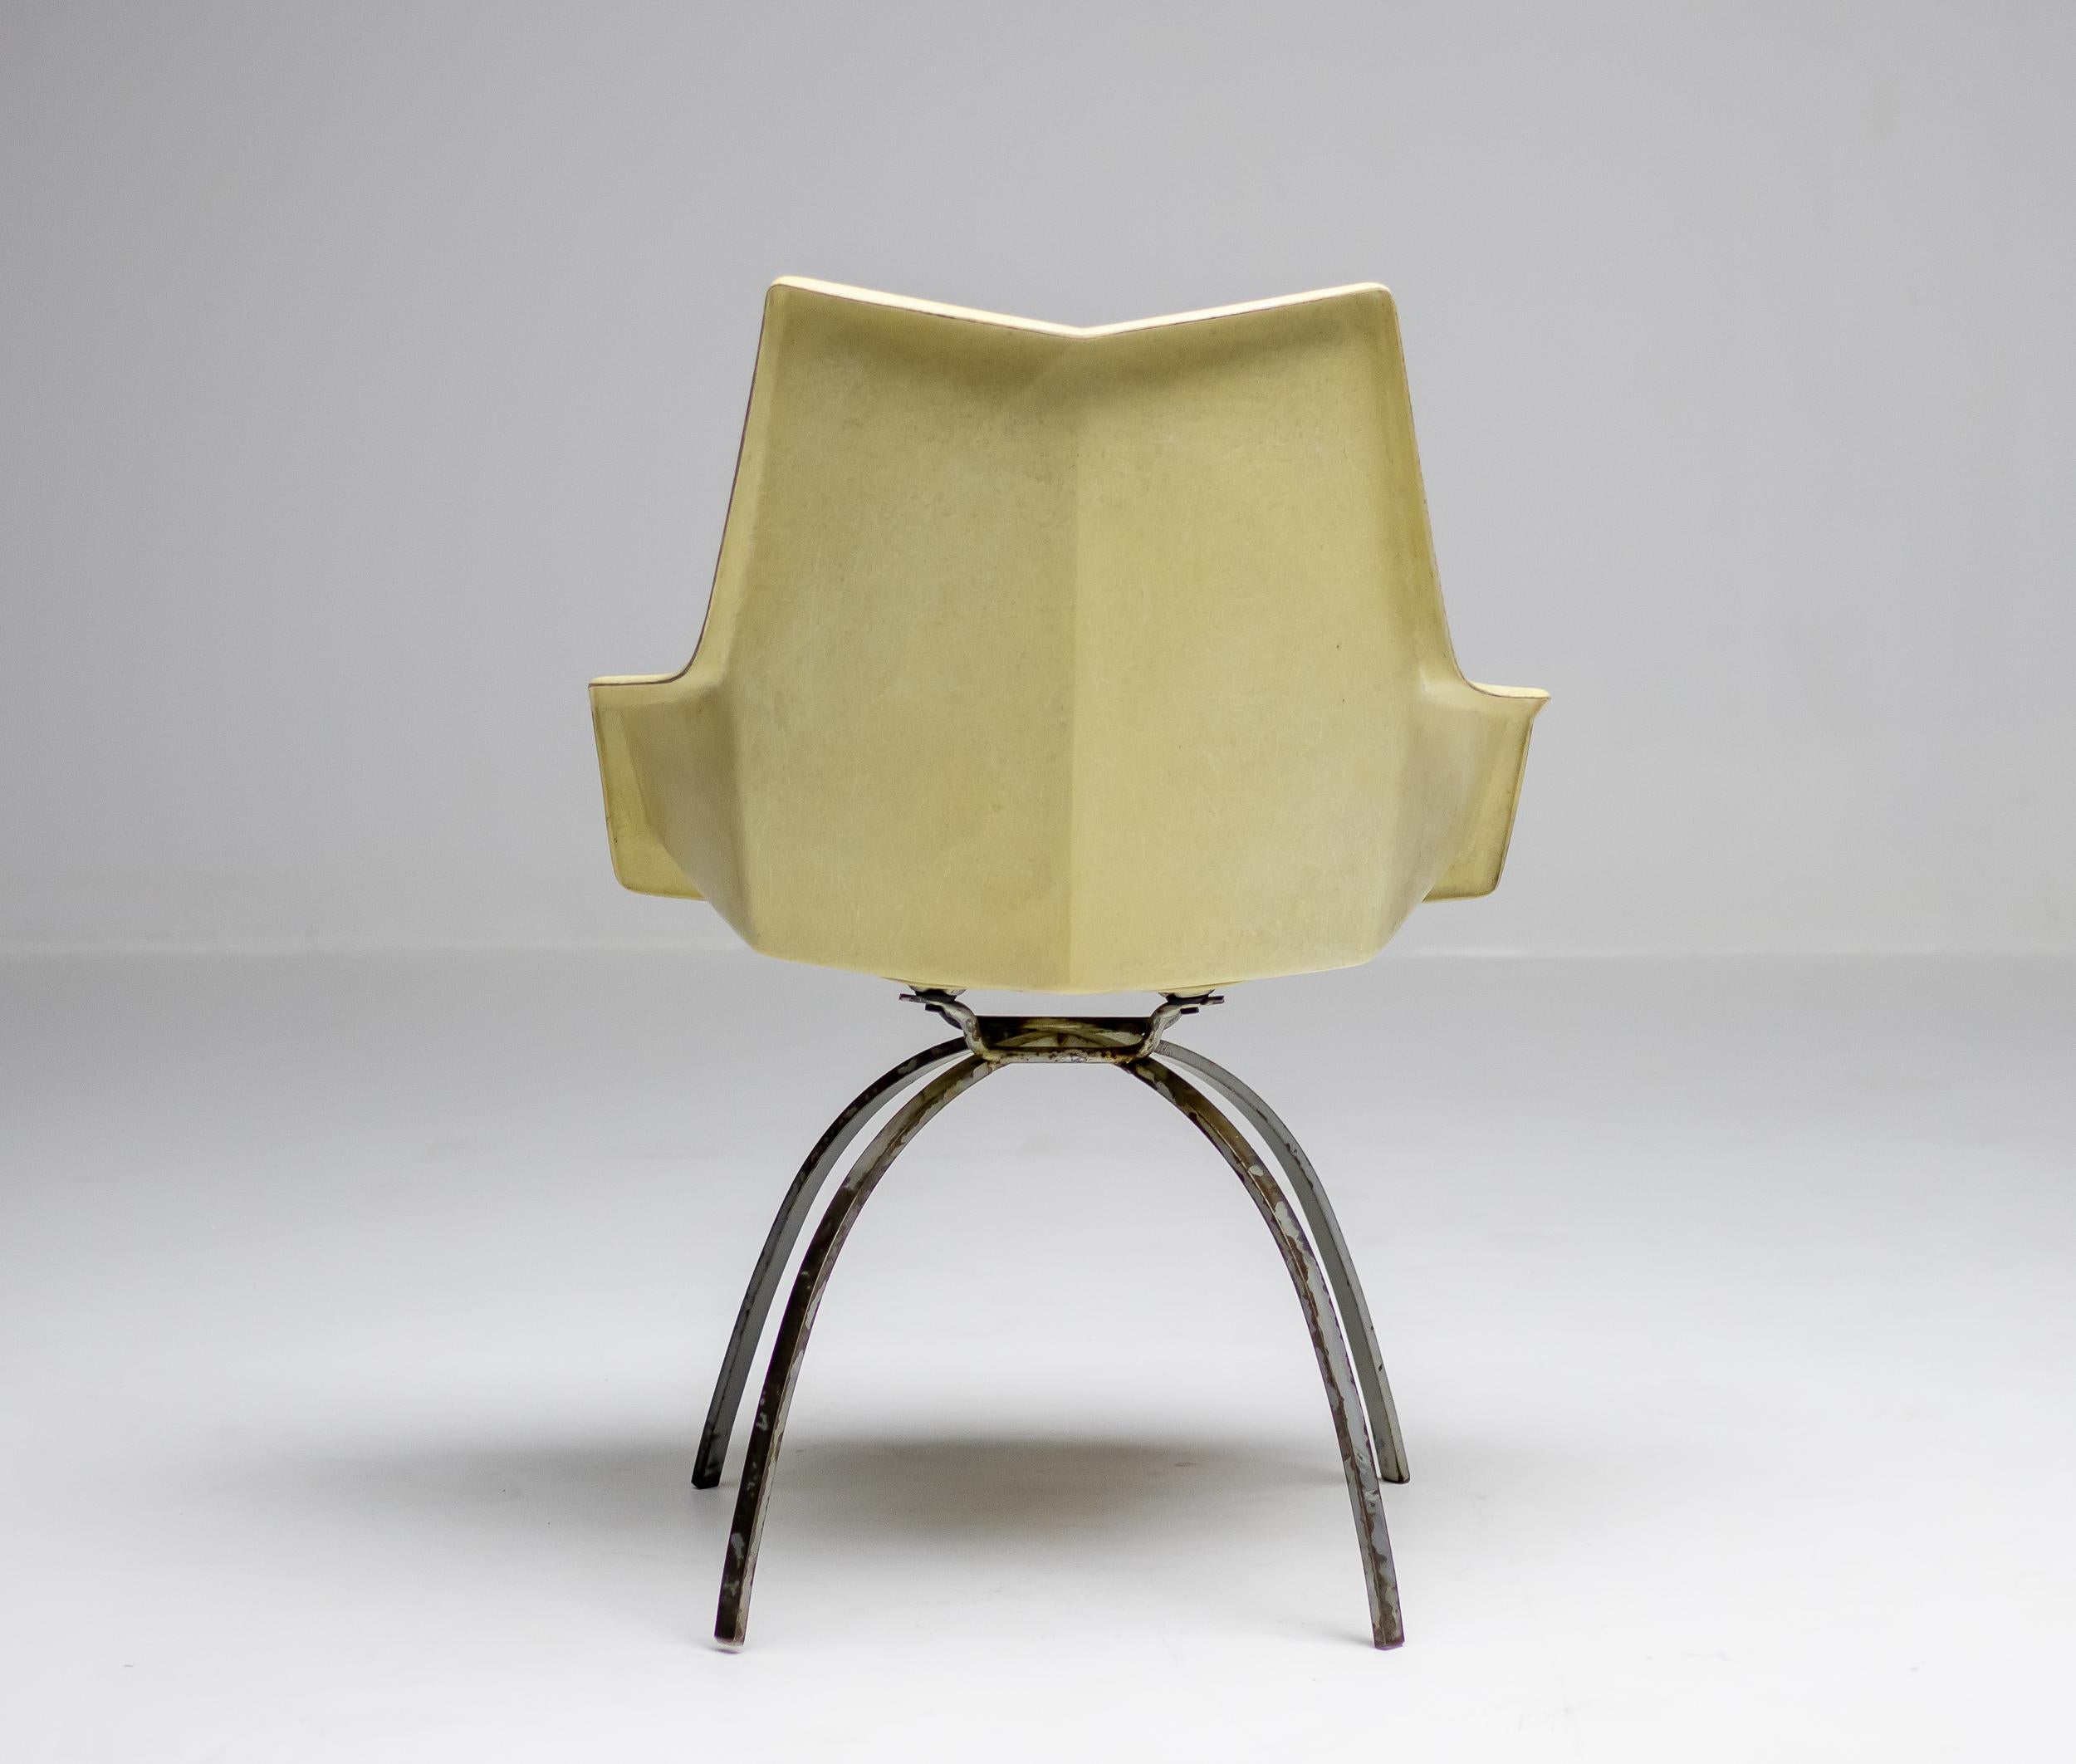 1960s vintage white molded fiberglass Origami arm shell chair designed by Paul McCobb on a very scarce spider base. A stunning example of this rarely seen combo. The faceted chair has been lovingly used with minimal wear. Distinctly thread shell